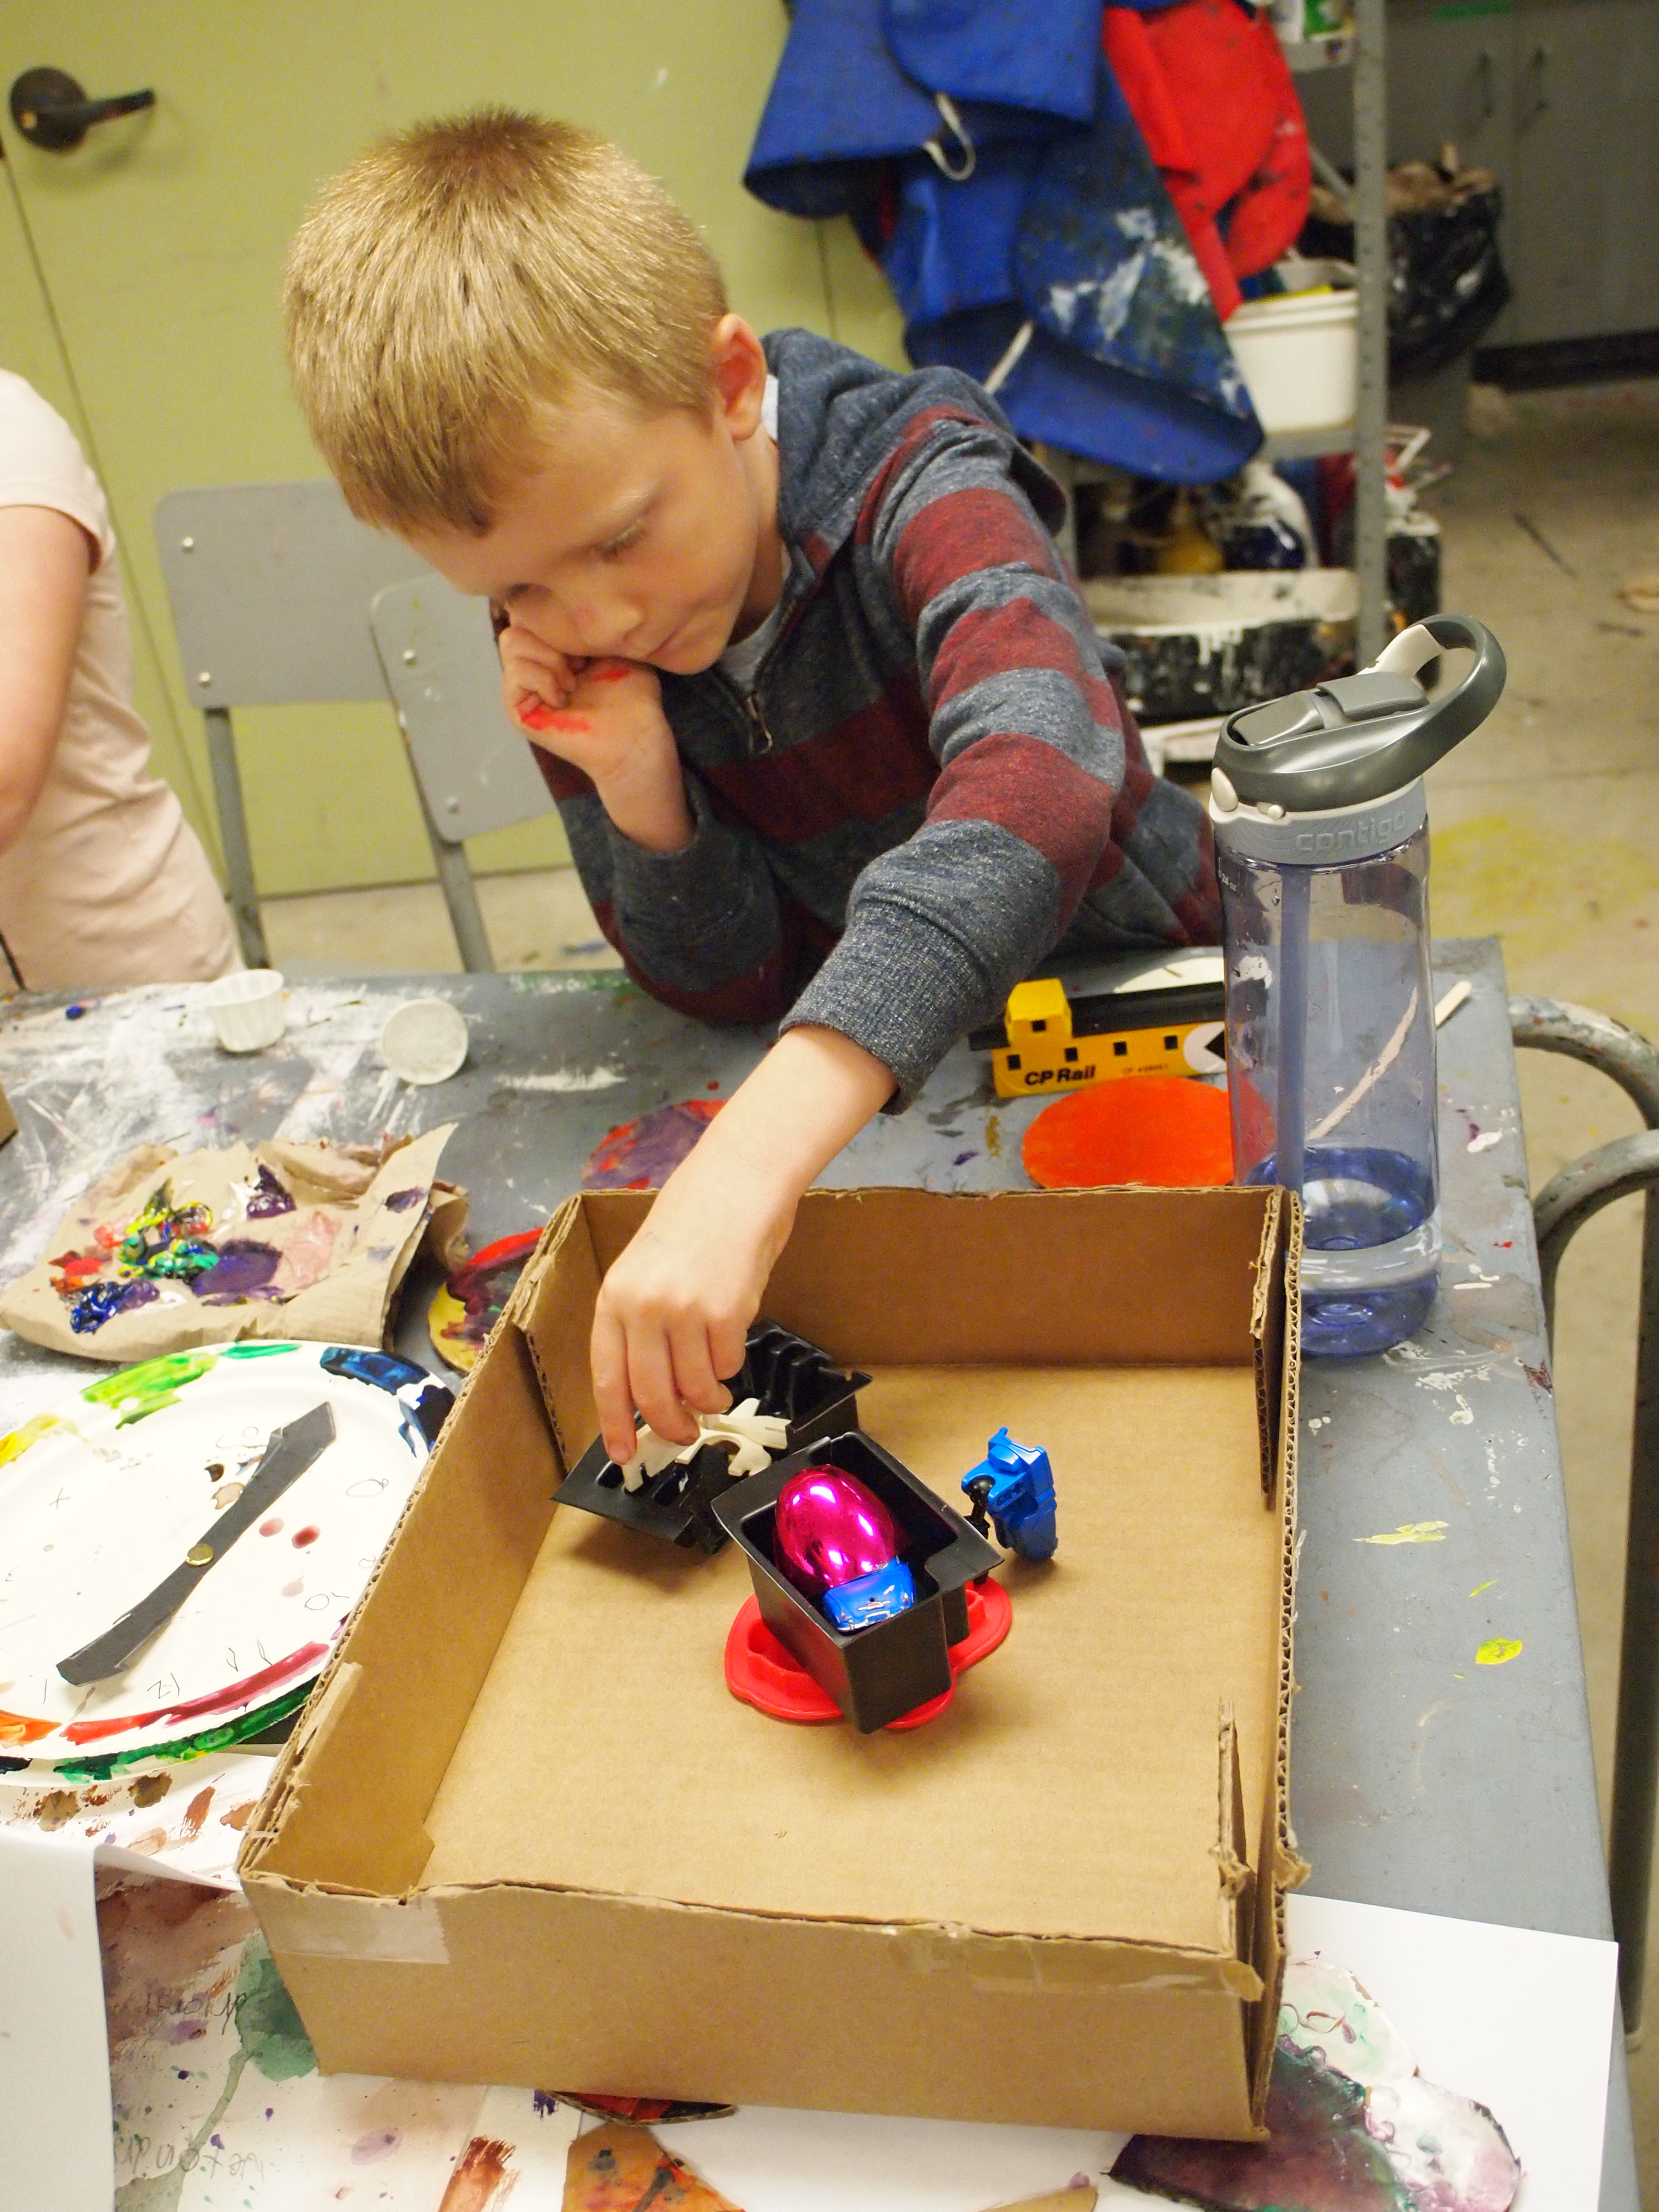 A young boy looking thoughtful as he places objects in a colourful abstract construction set inside a shallow cardboard frame